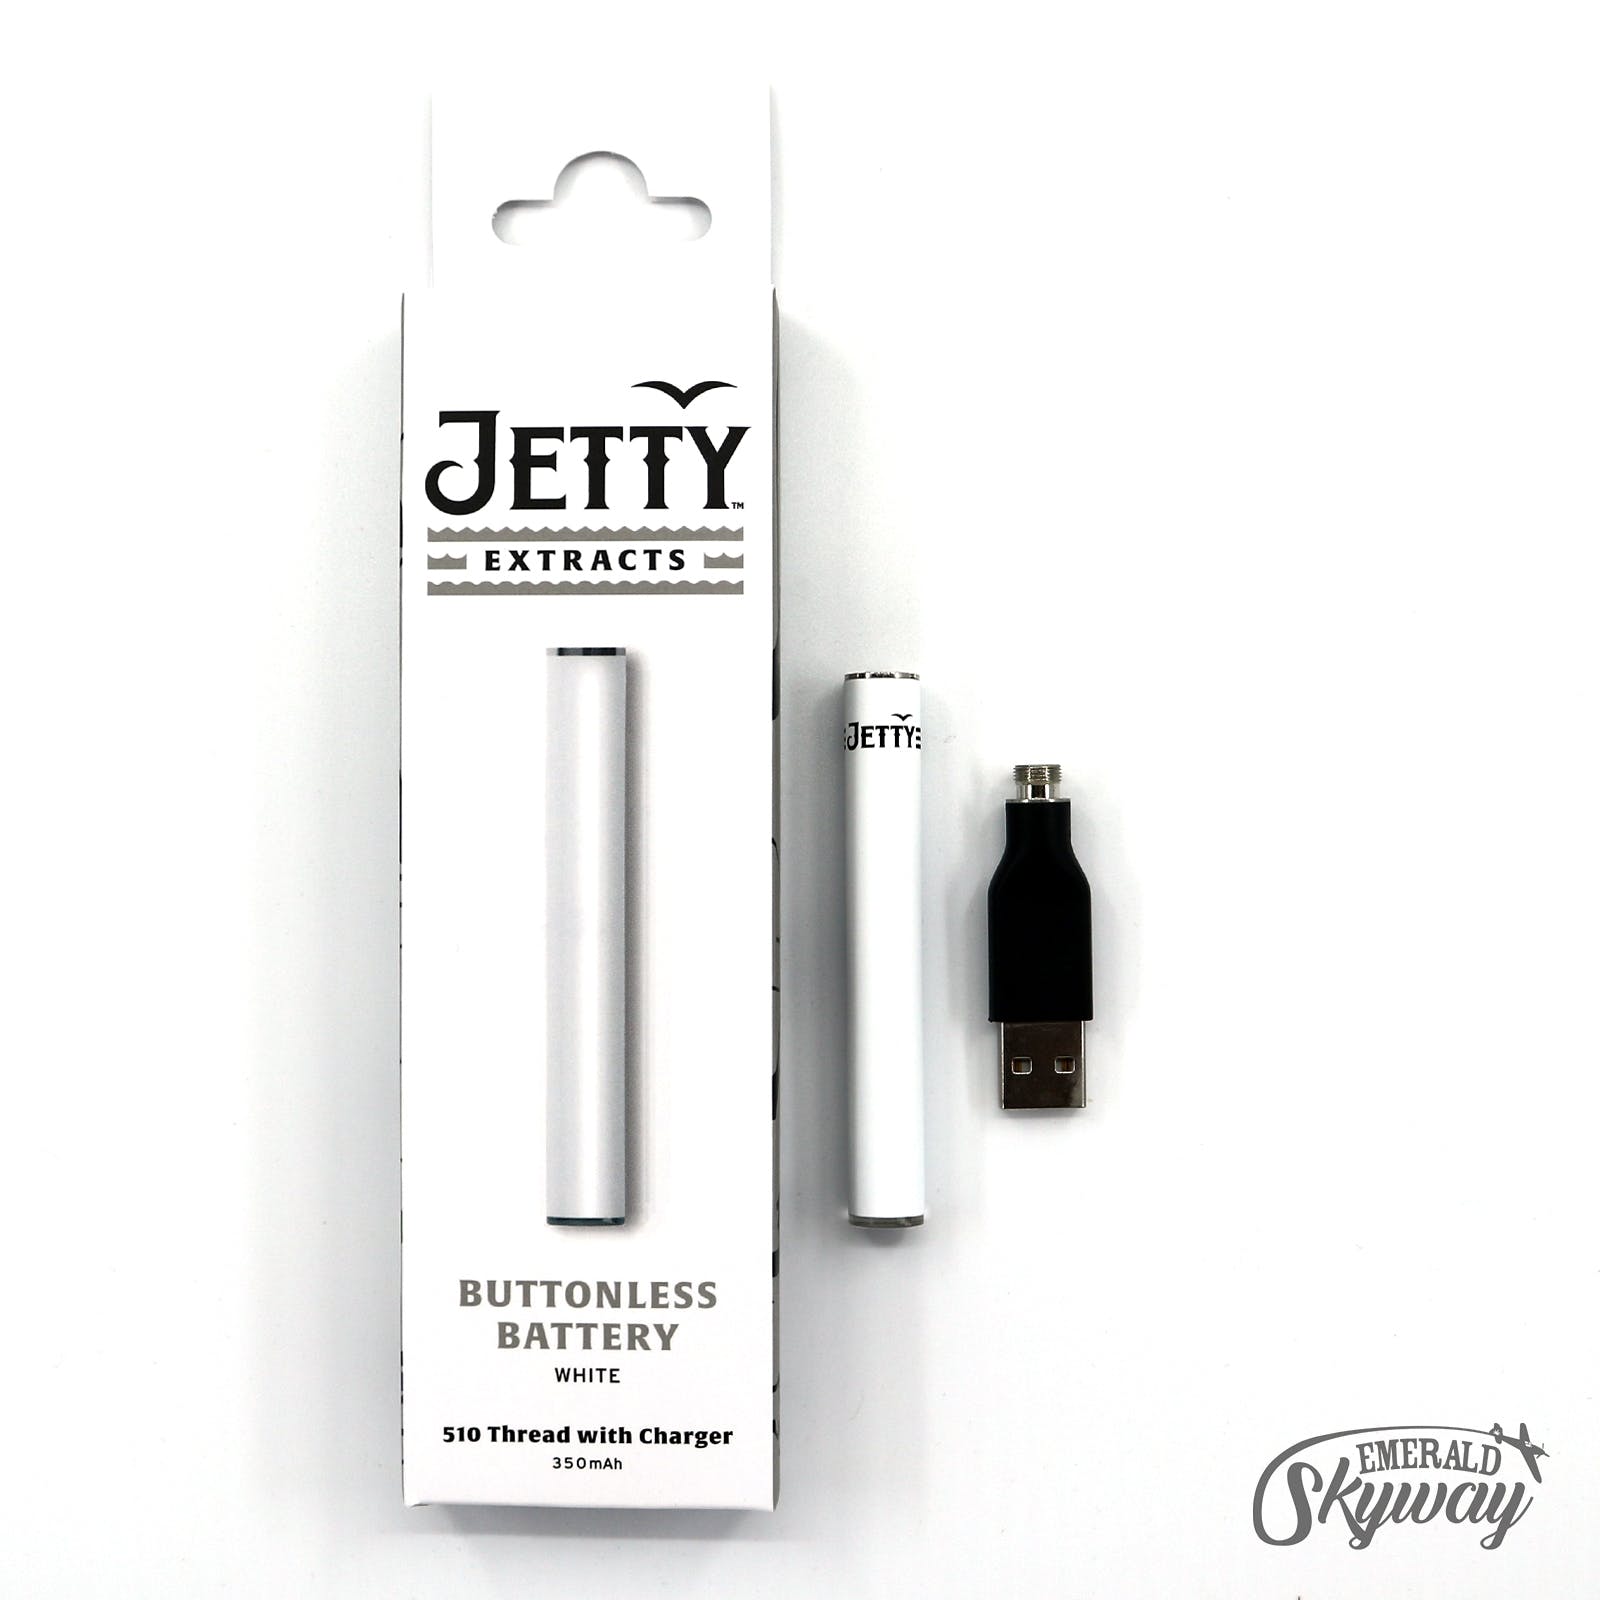 Jetty Extracts: Pen Battery and Charger